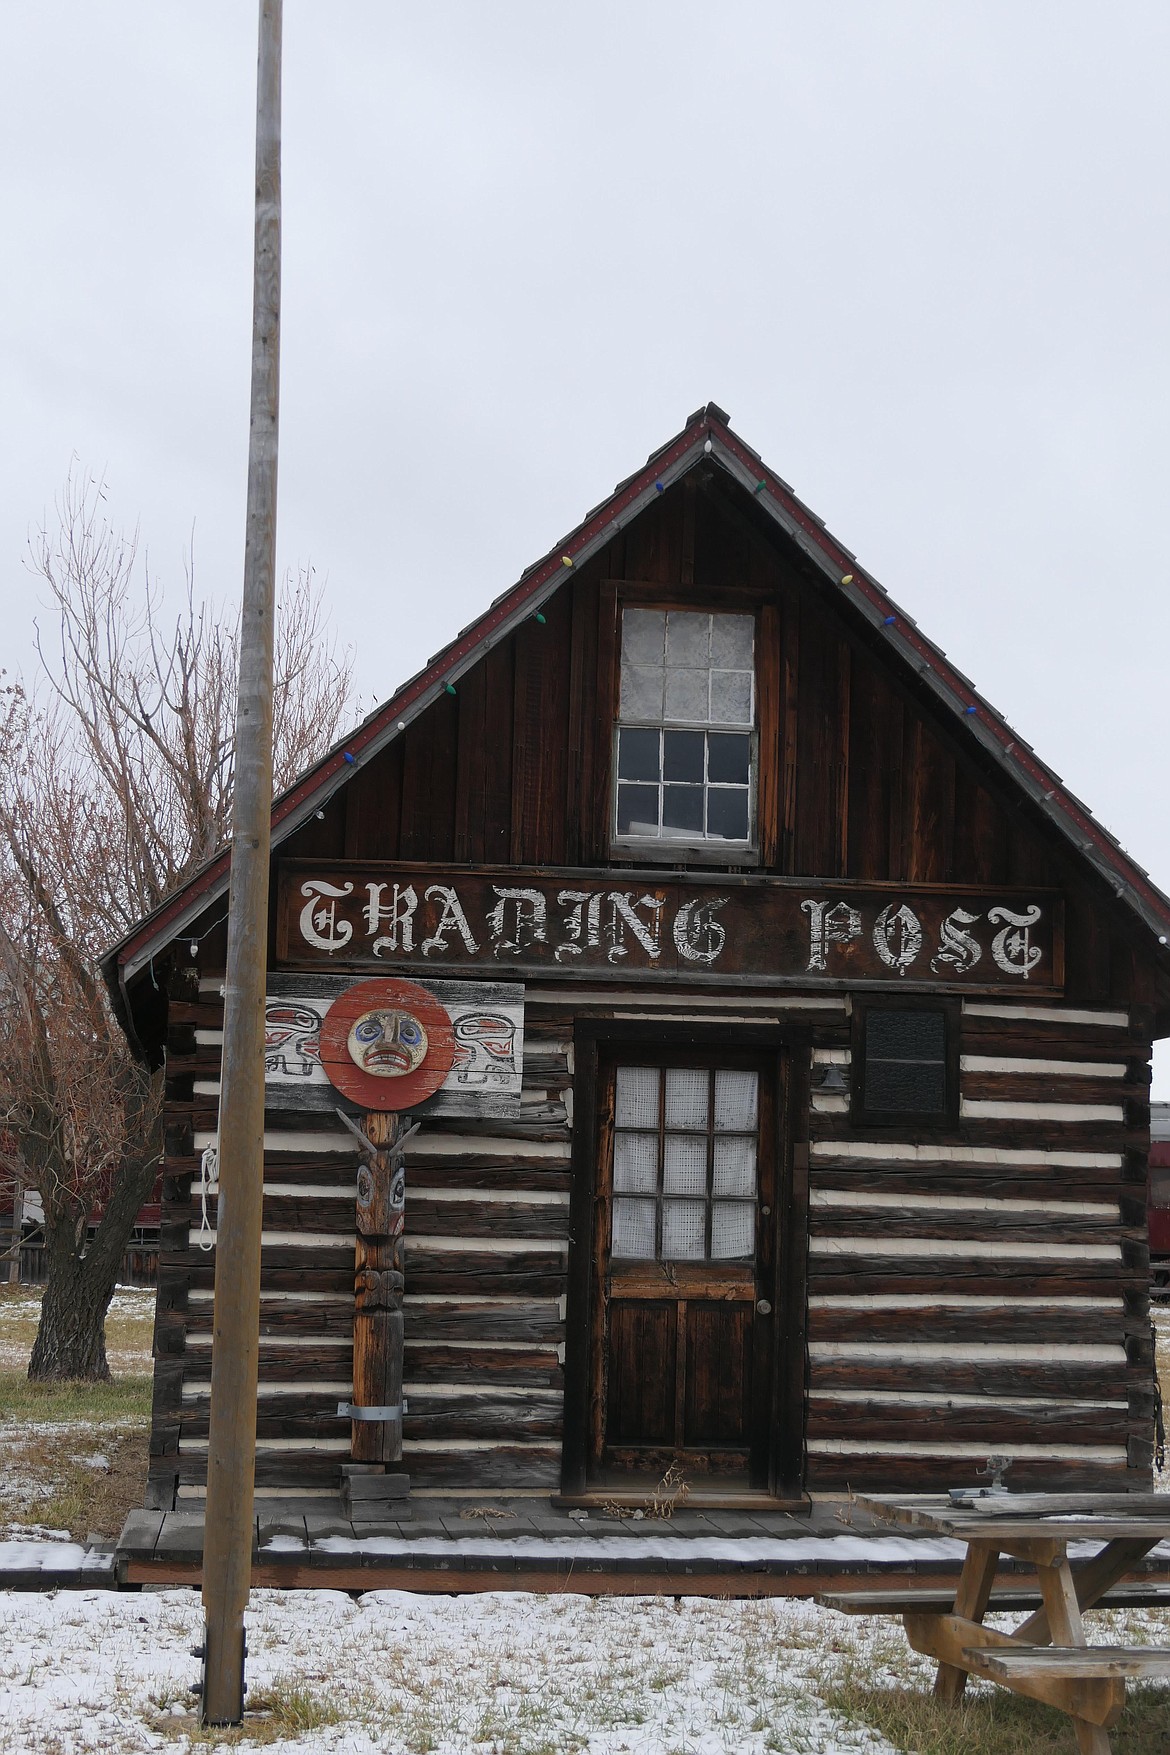 Built by Duncan McDonald in the 1870s, this was the first building Preston Miller salvaged and rebuilt to create the Four Winds Trading Post in 1970. It served as the initial store until it was relocated to the Duncan McDonald building. (Carolyn Hidy/Lake County Leader)